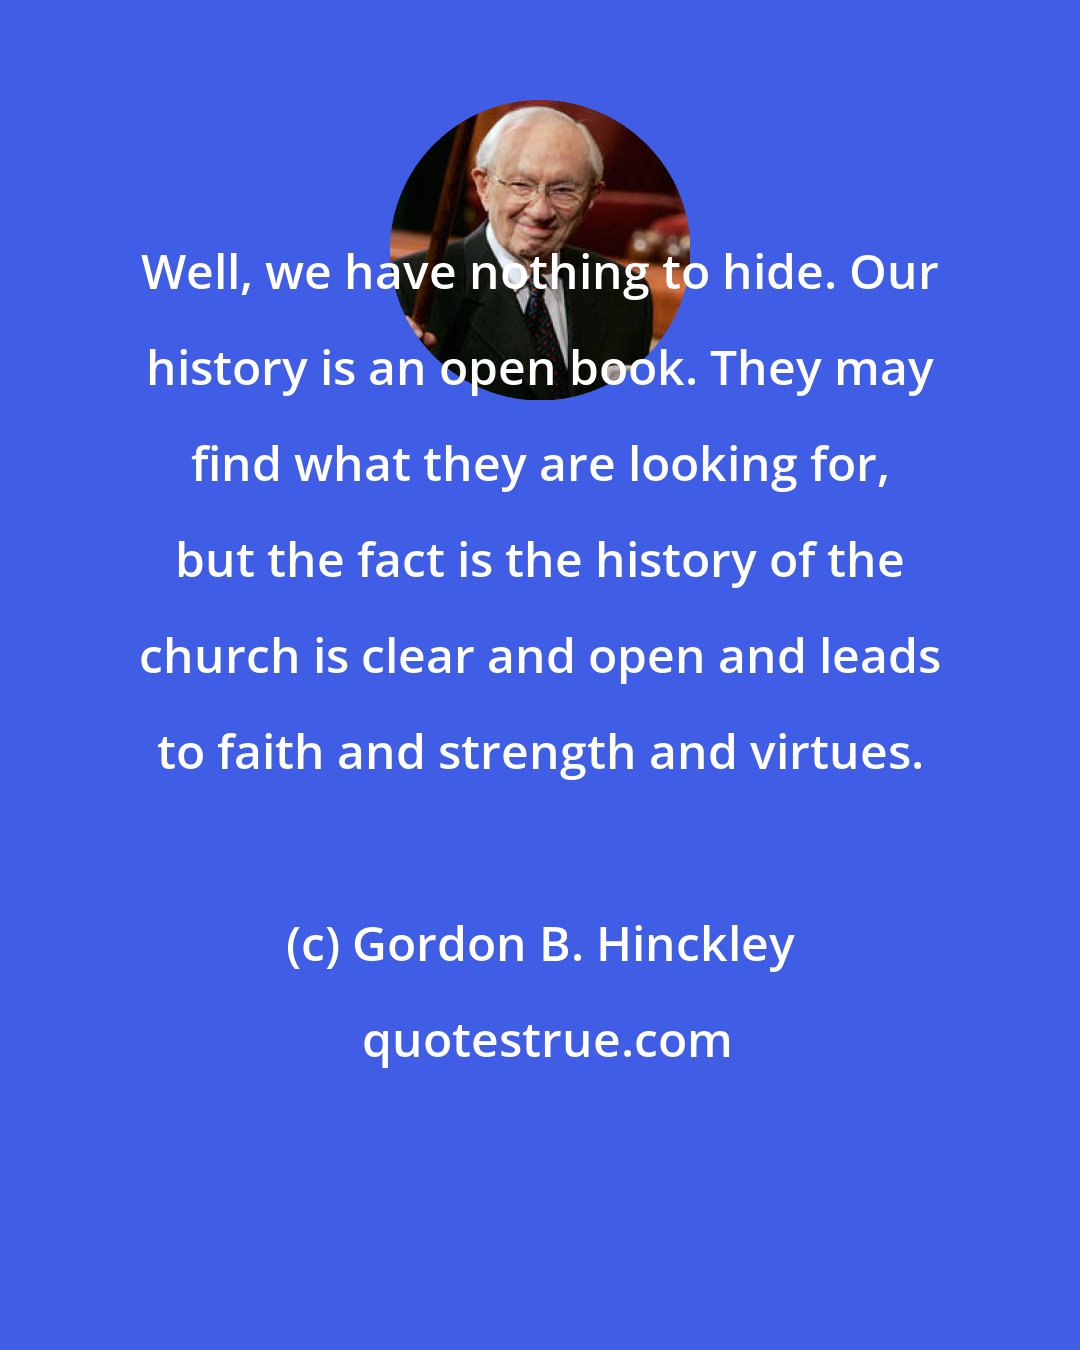 Gordon B. Hinckley: Well, we have nothing to hide. Our history is an open book. They may find what they are looking for, but the fact is the history of the church is clear and open and leads to faith and strength and virtues.